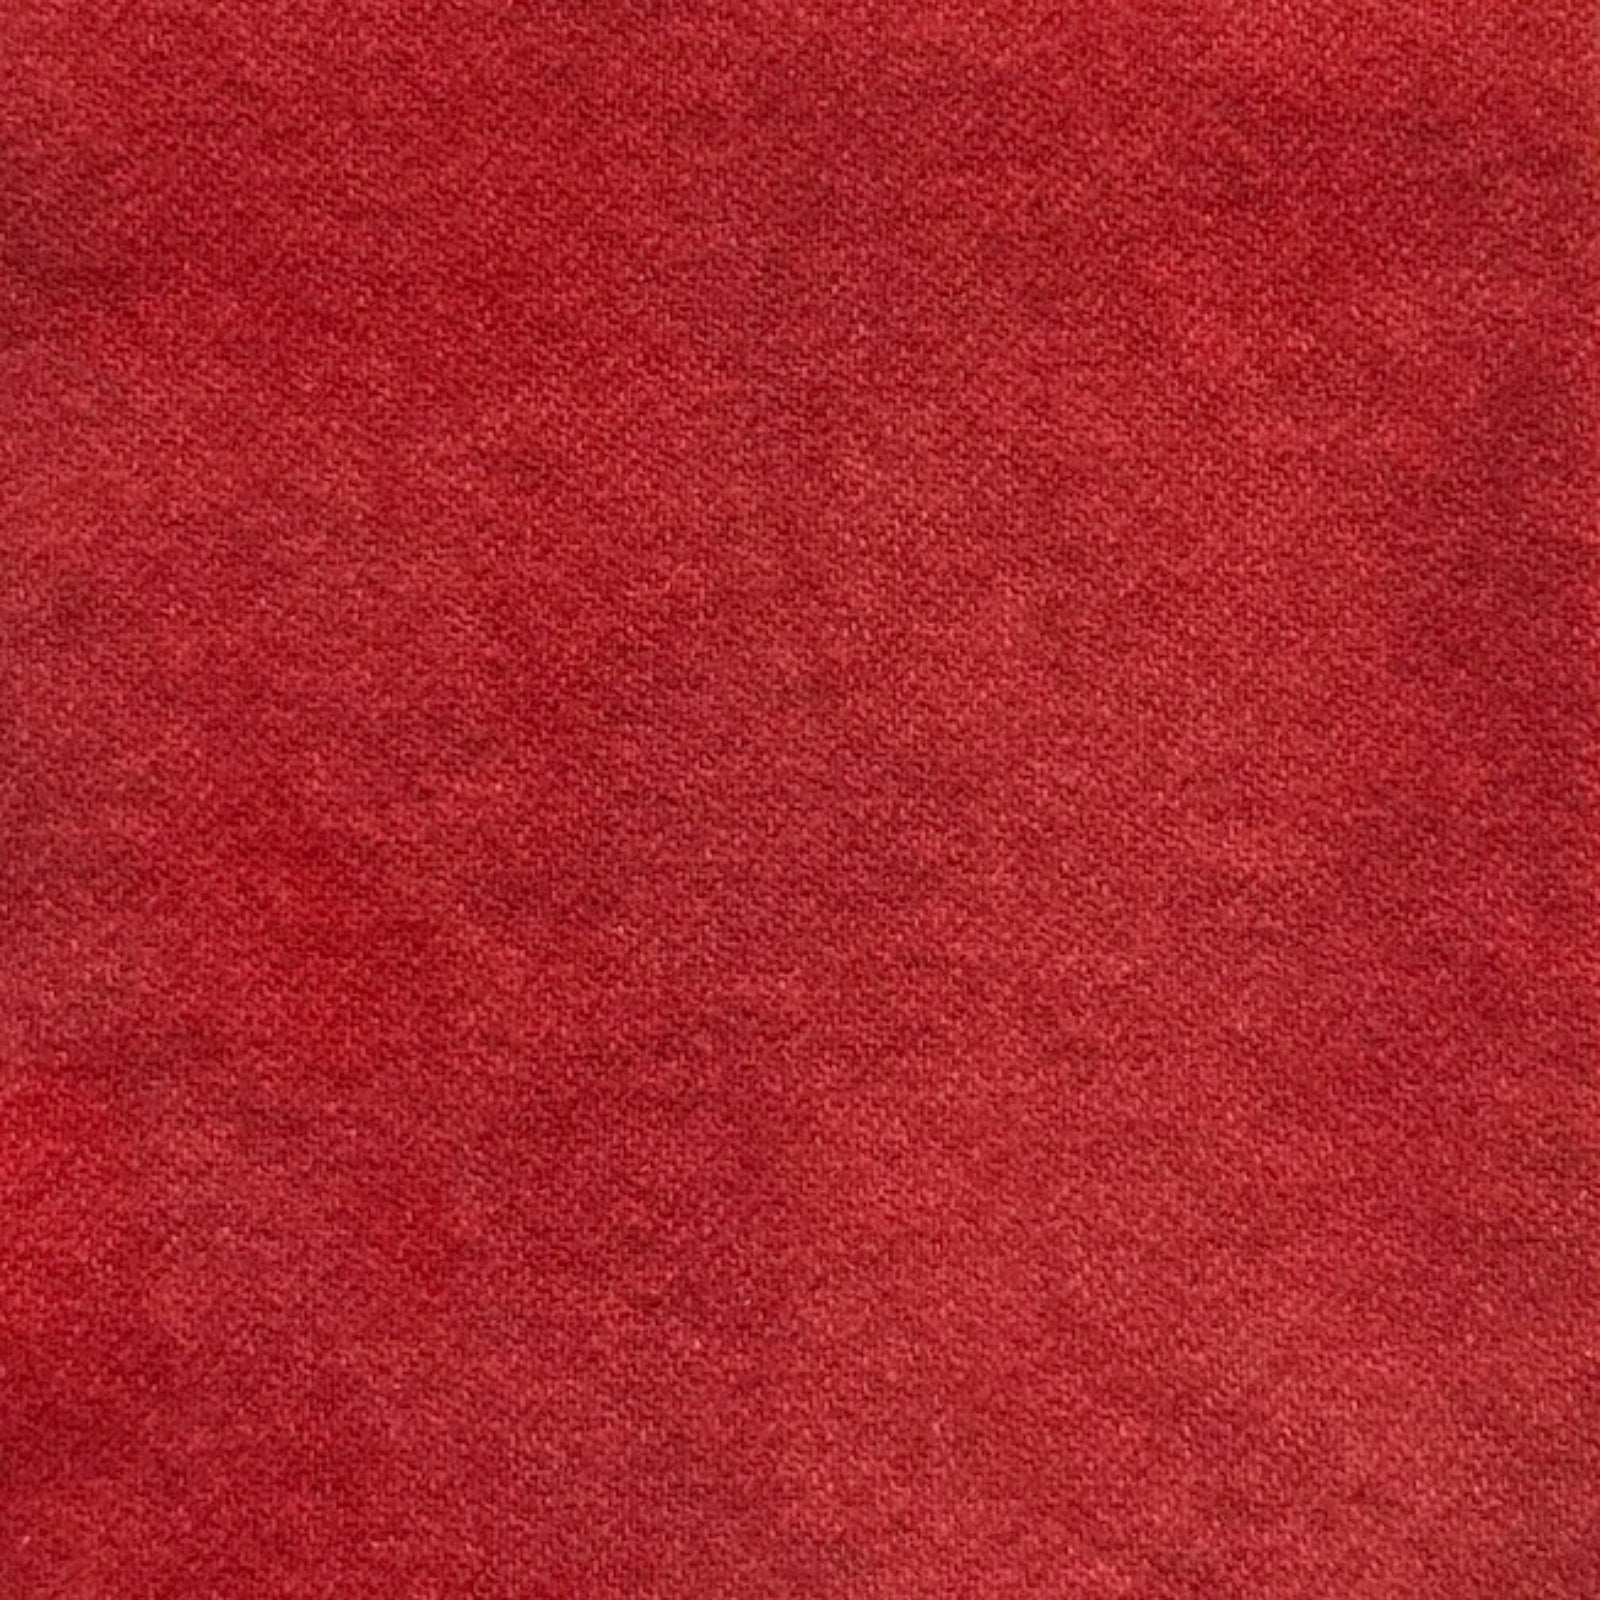 Old Glory Red - Colorama Hand Dyed Wool - Offered by HoneyBee Hive Rug Hooking